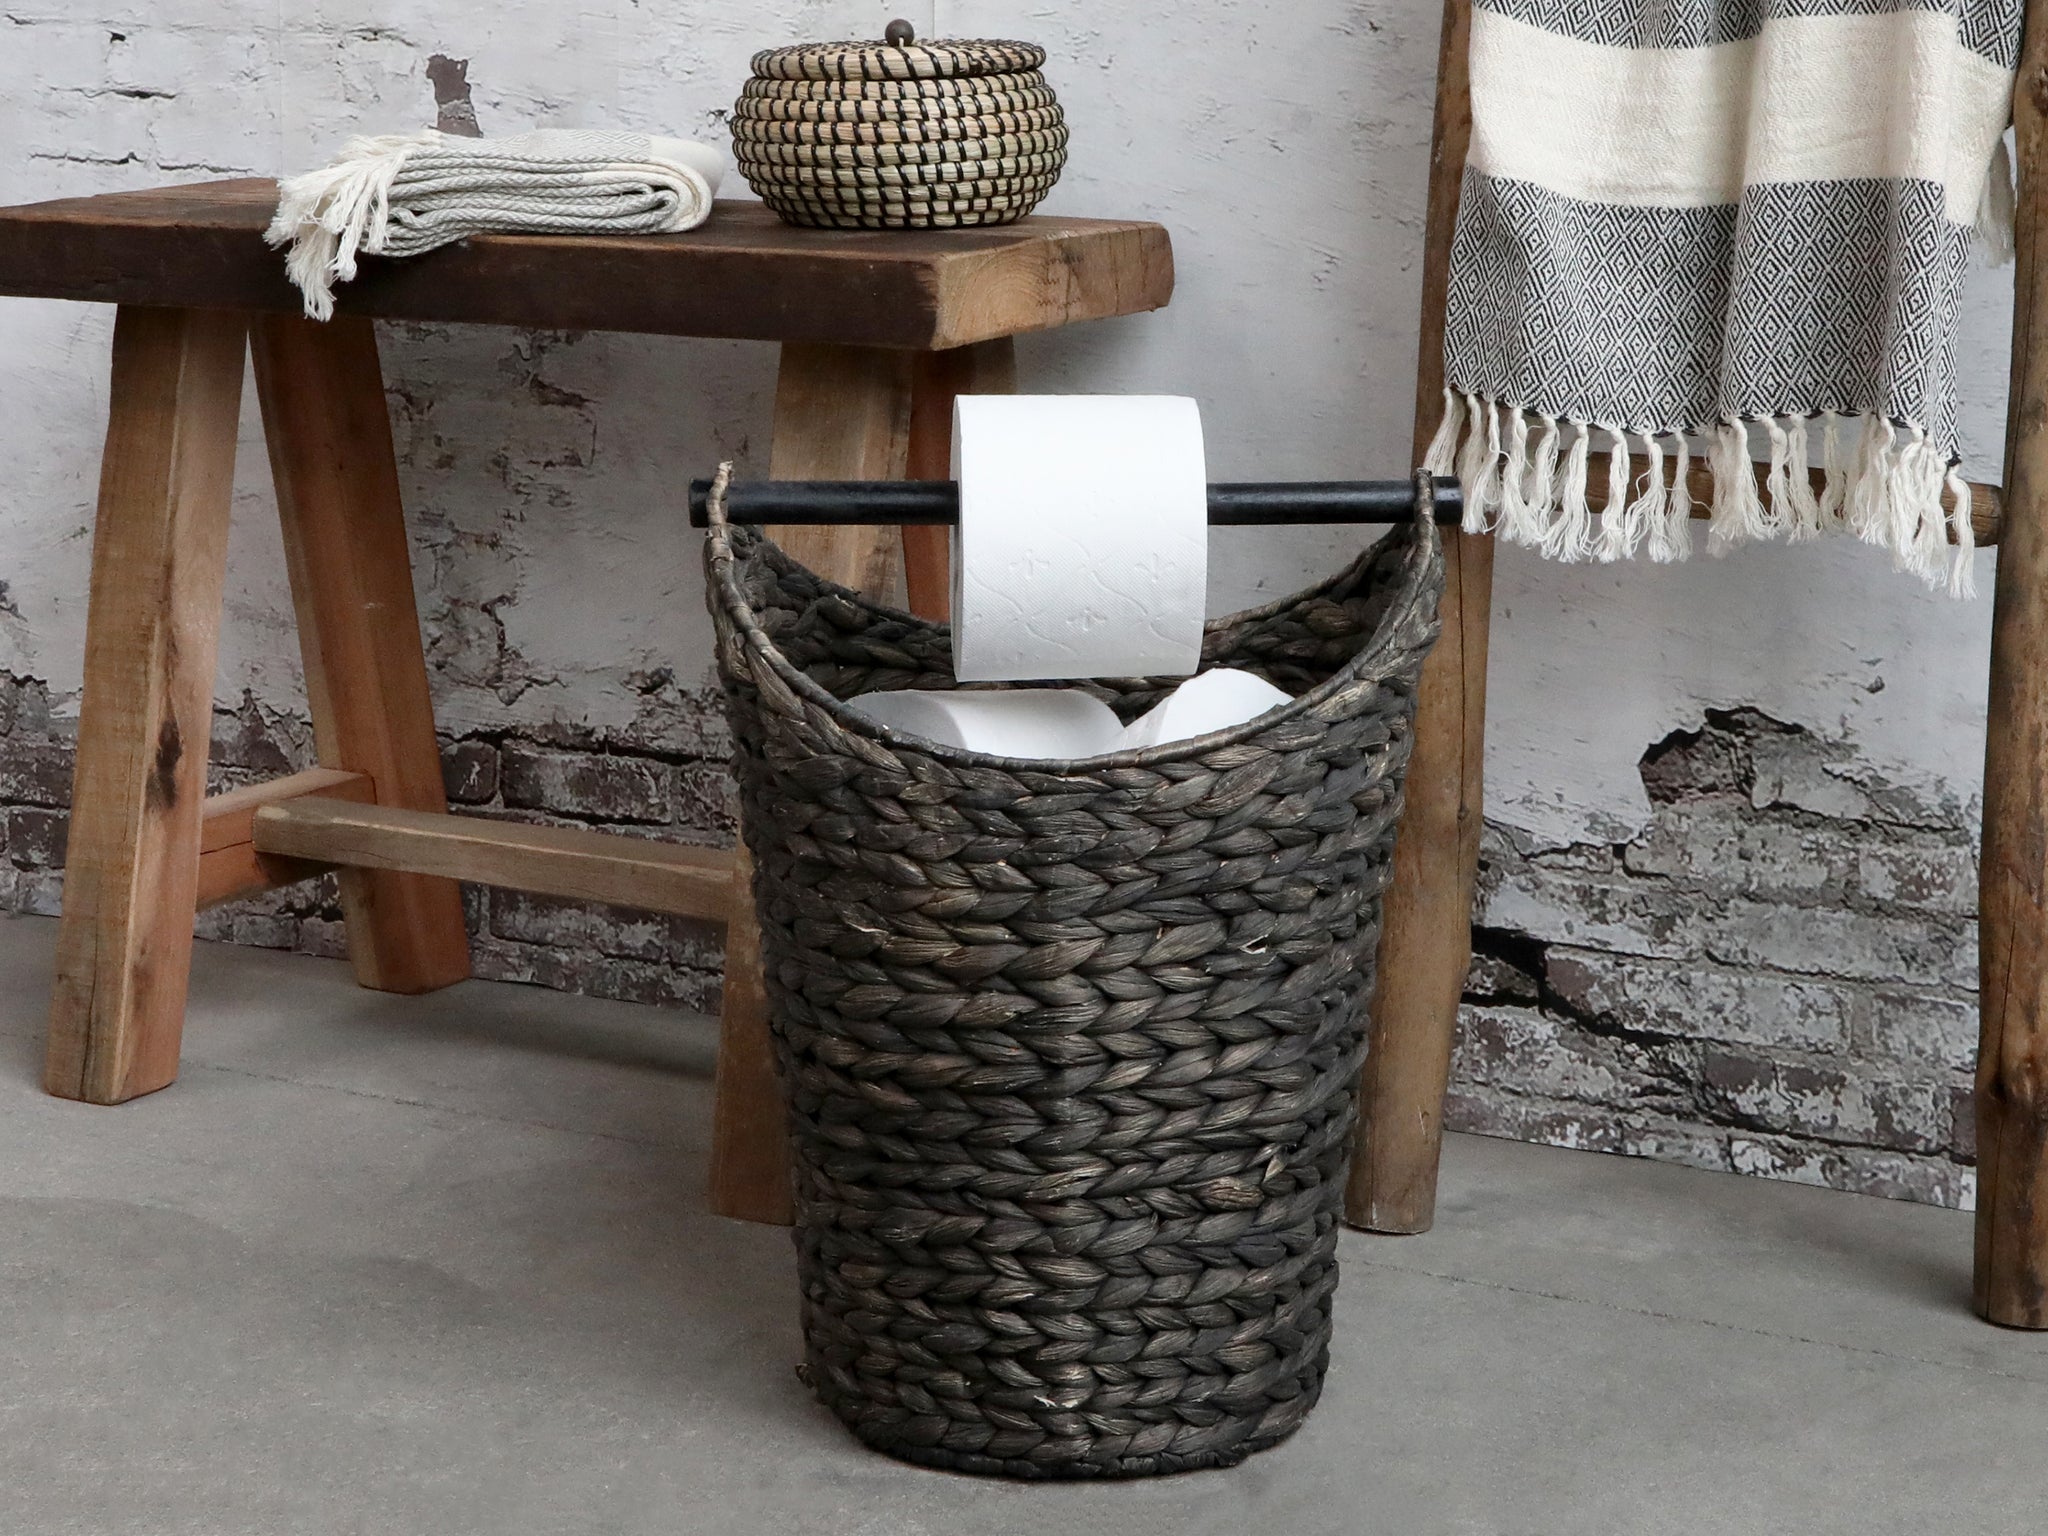 Basket with Loo roll holder